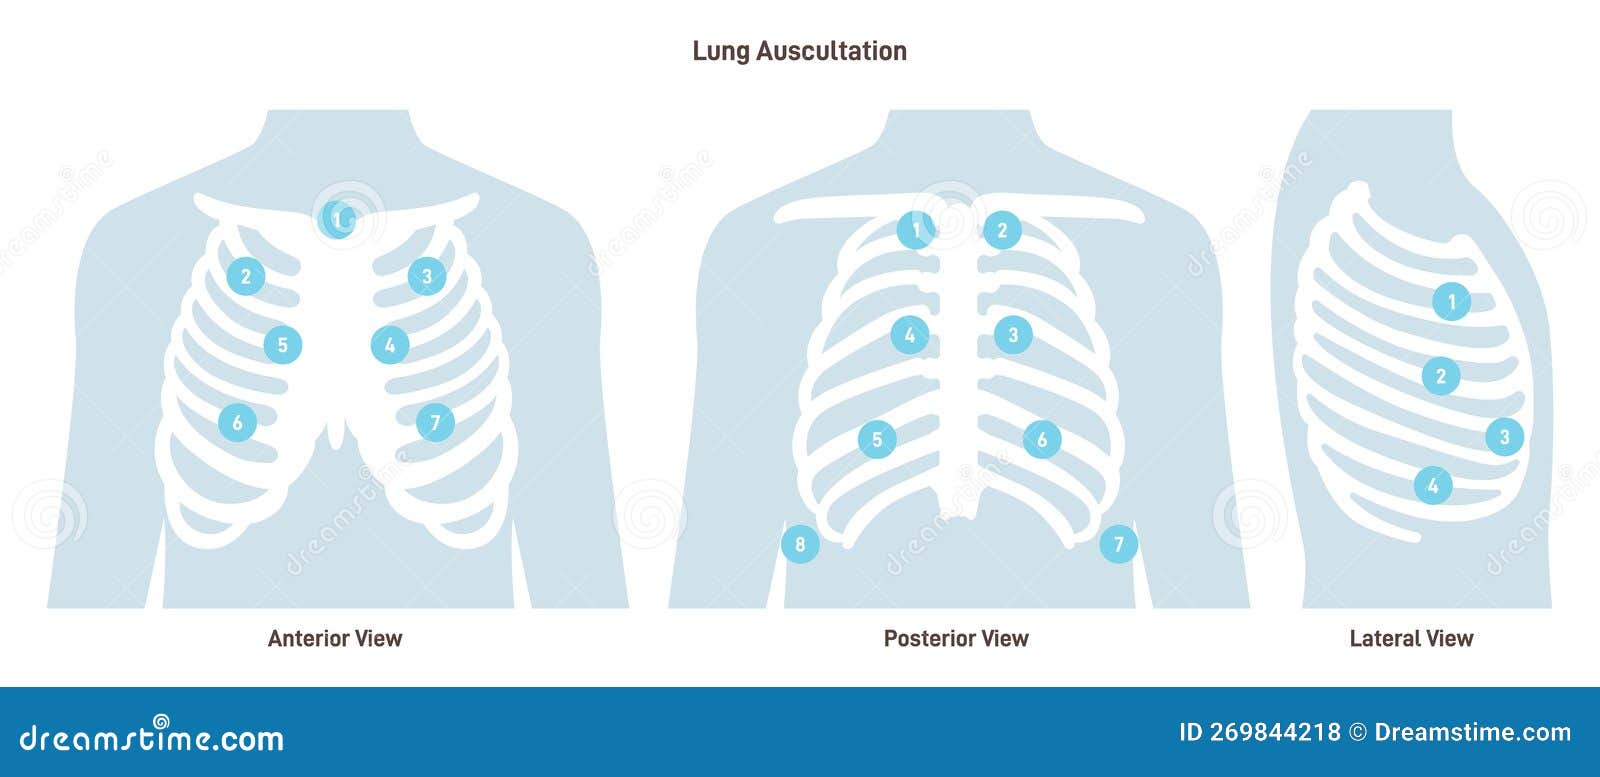 Lung Auscultation Thorax Anterior Posterior Lateral Position Vector